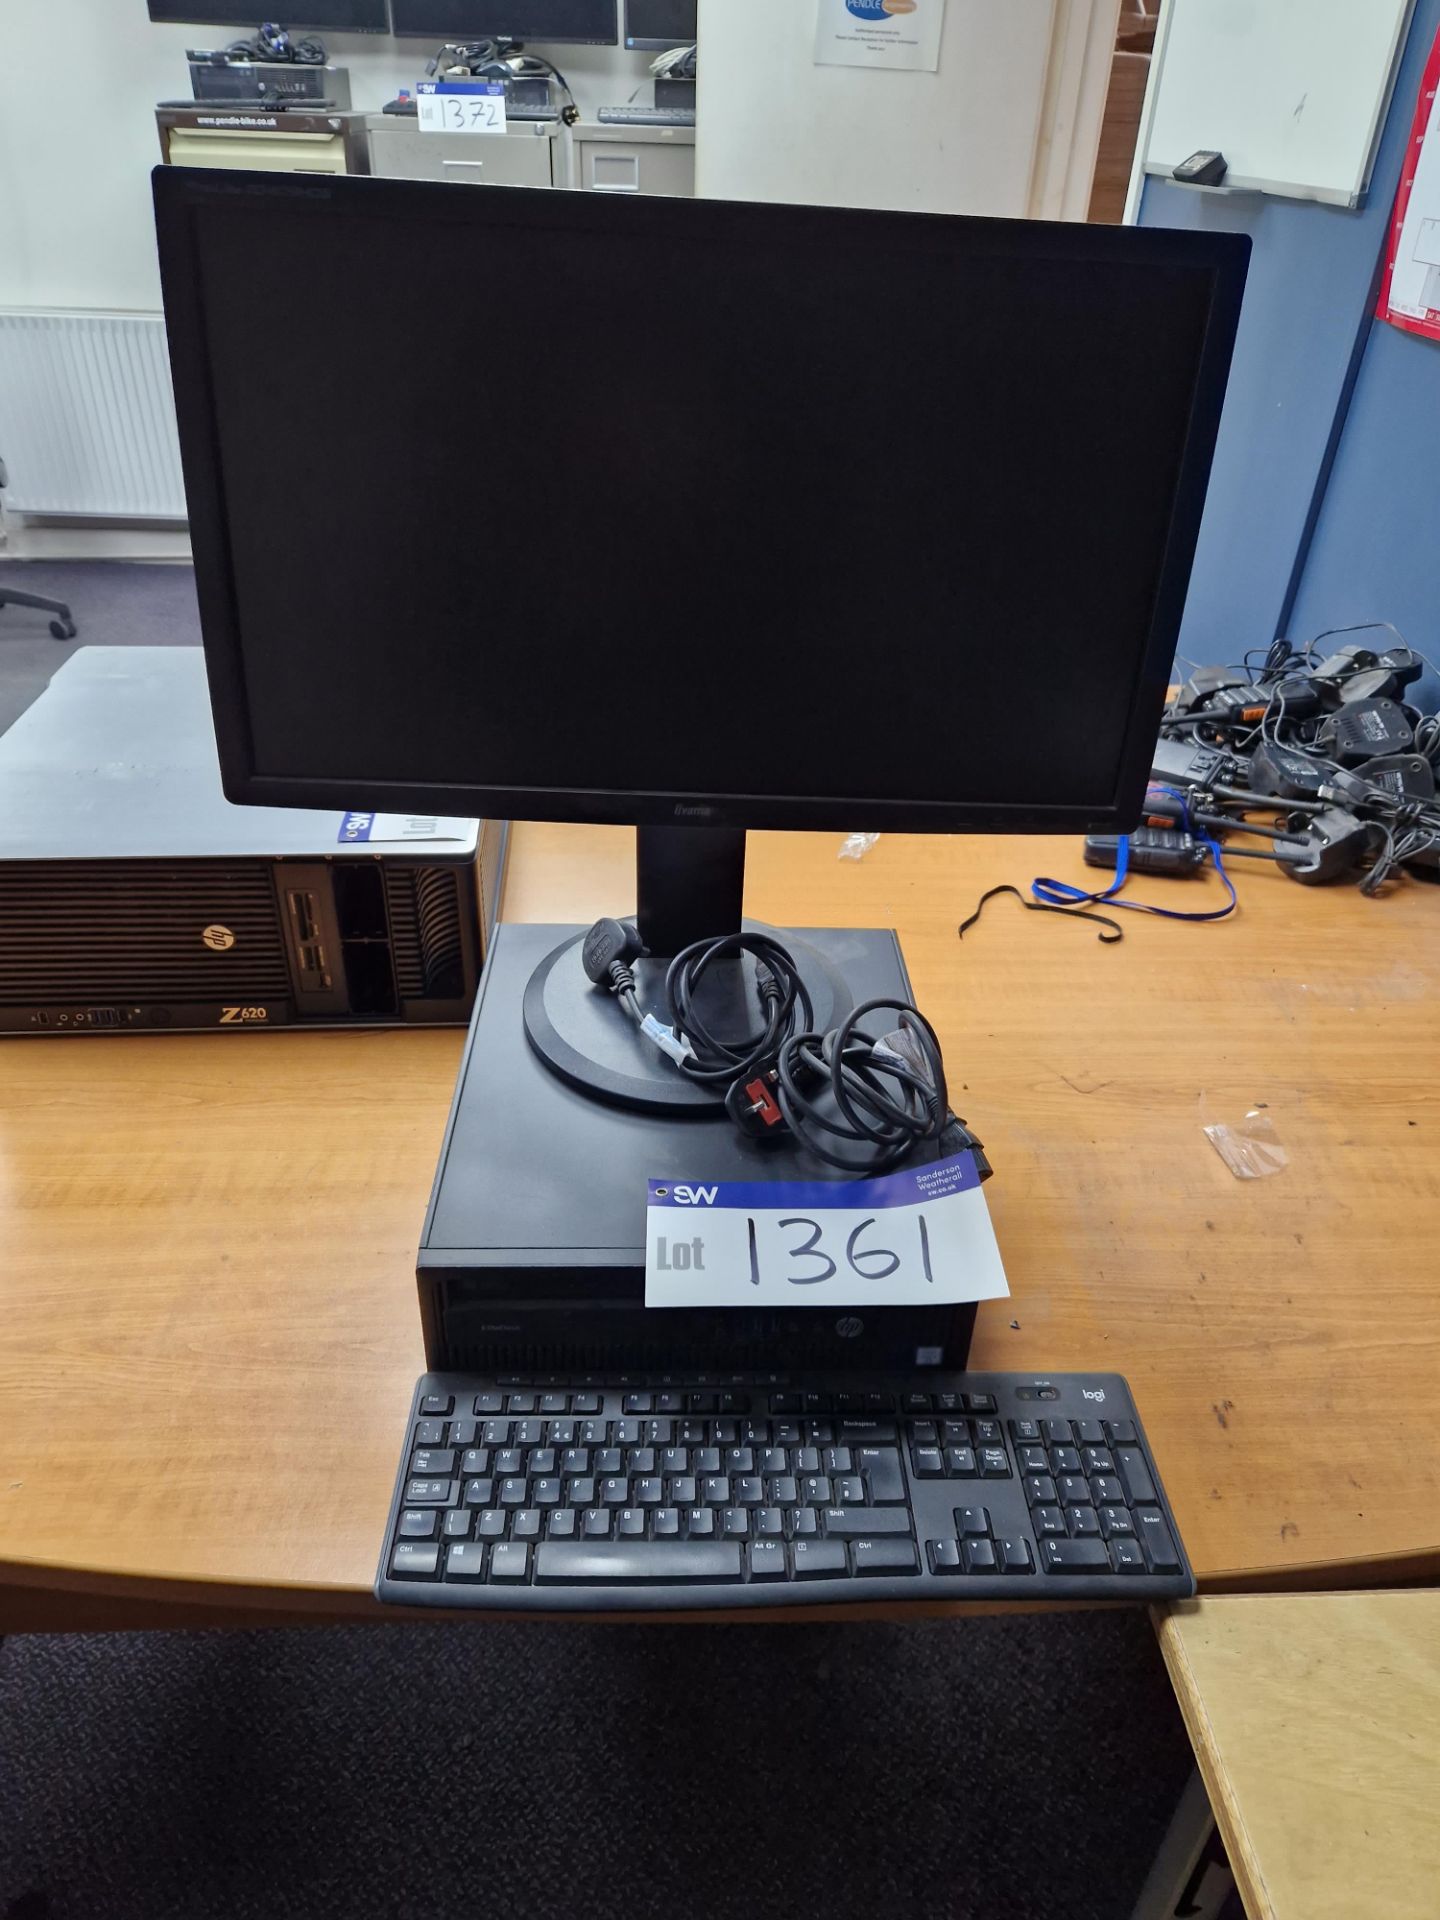 HP Elitedesk Core i7 Desktop PC, Monitor, Keyboard and Mouse (Hard Drive Removed) Please read the